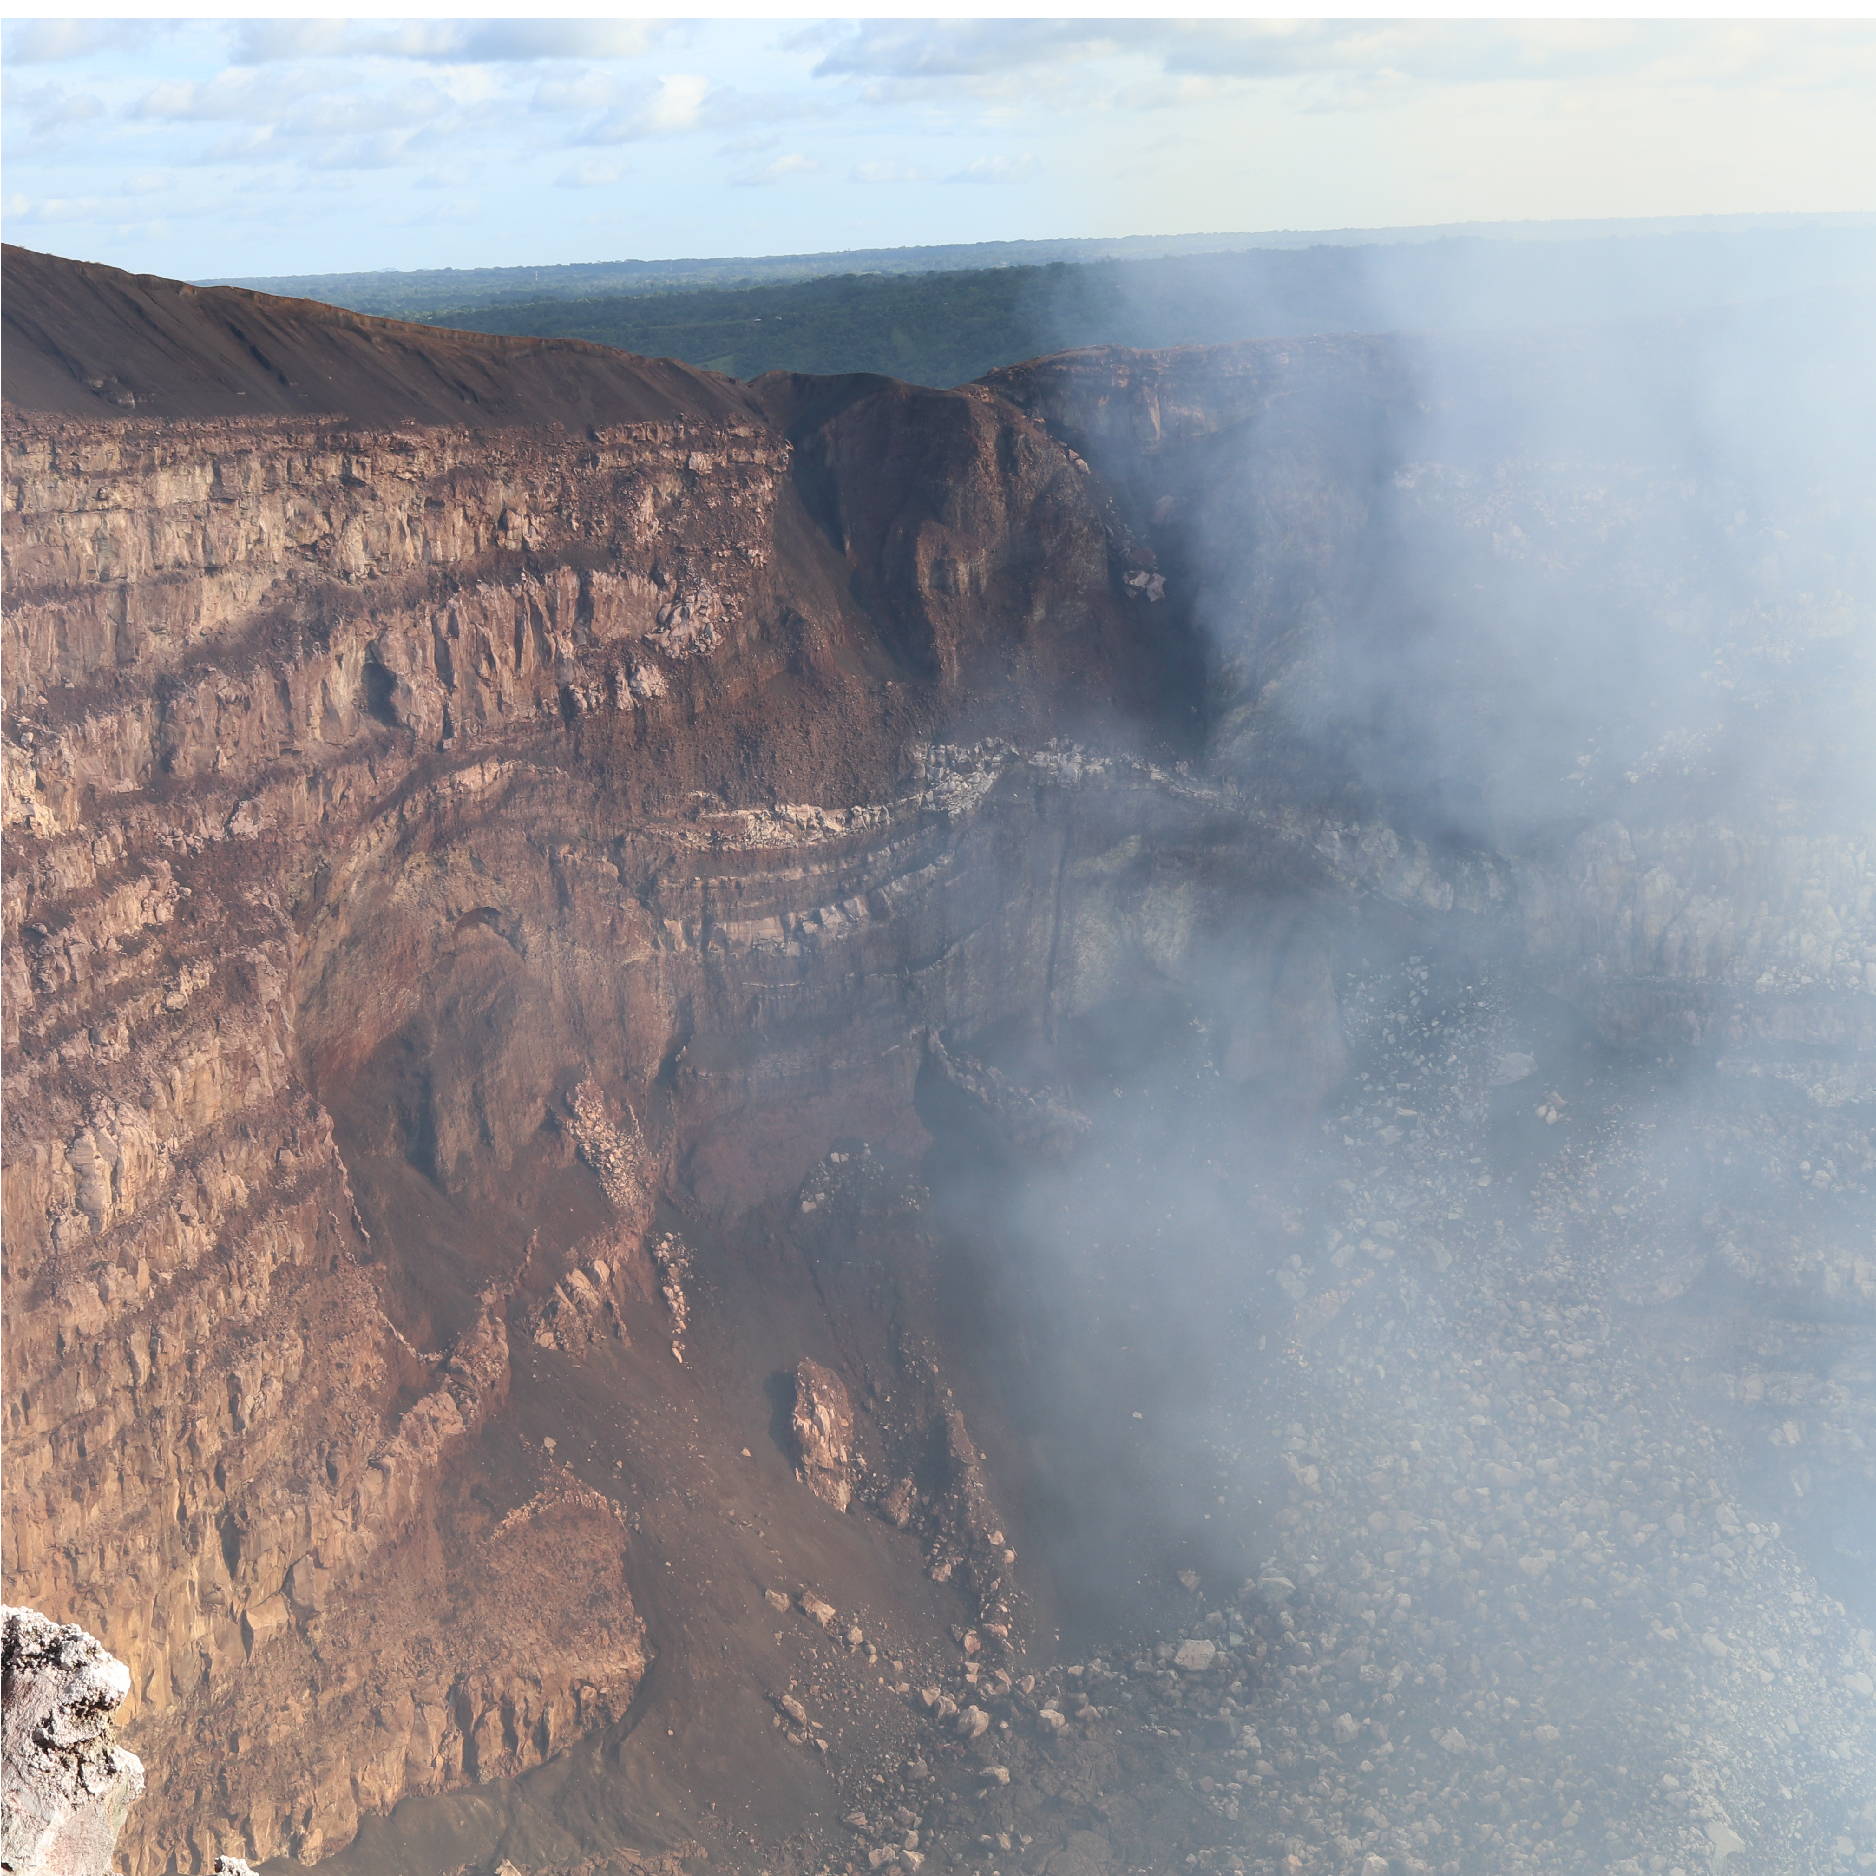 The steep edge of a volcano in Nicaragua. Large Rocks can be seen below as smoke rises from the center.  